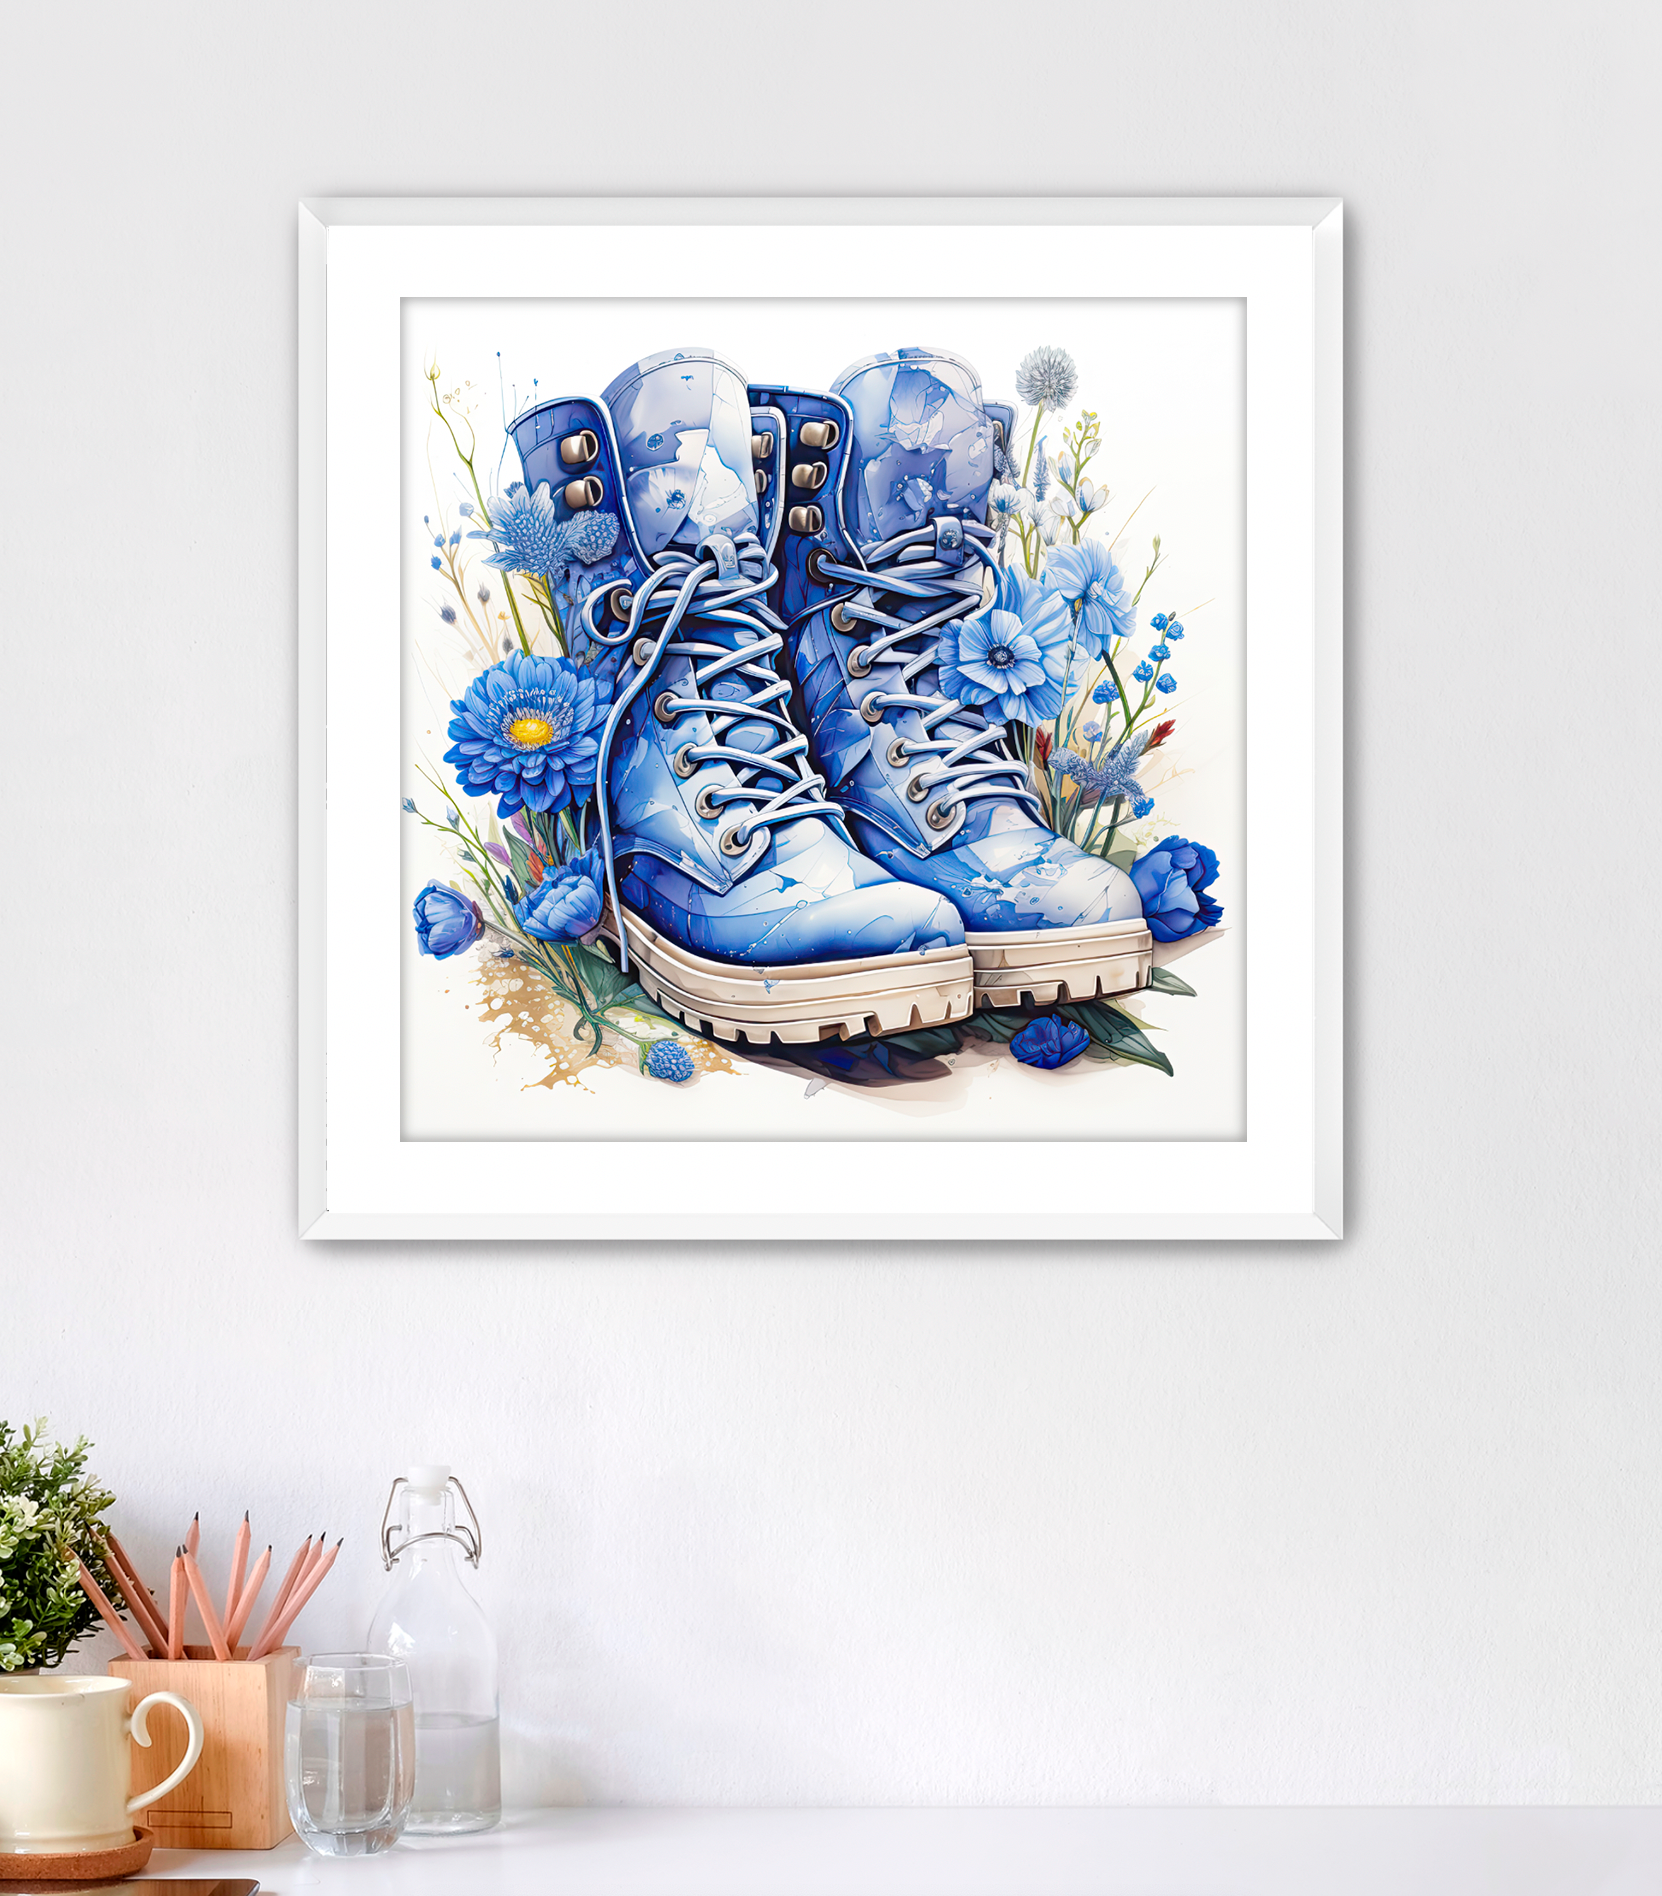 Adorable Framed Fine Art Print. The artwork features watercolor style blue hiking boots surrounded in blue wildflowers. A great gift for women hiking or gardening enthusiasts. Art comes with white mat and white frame. This wall art is for sale at customconcepts.art